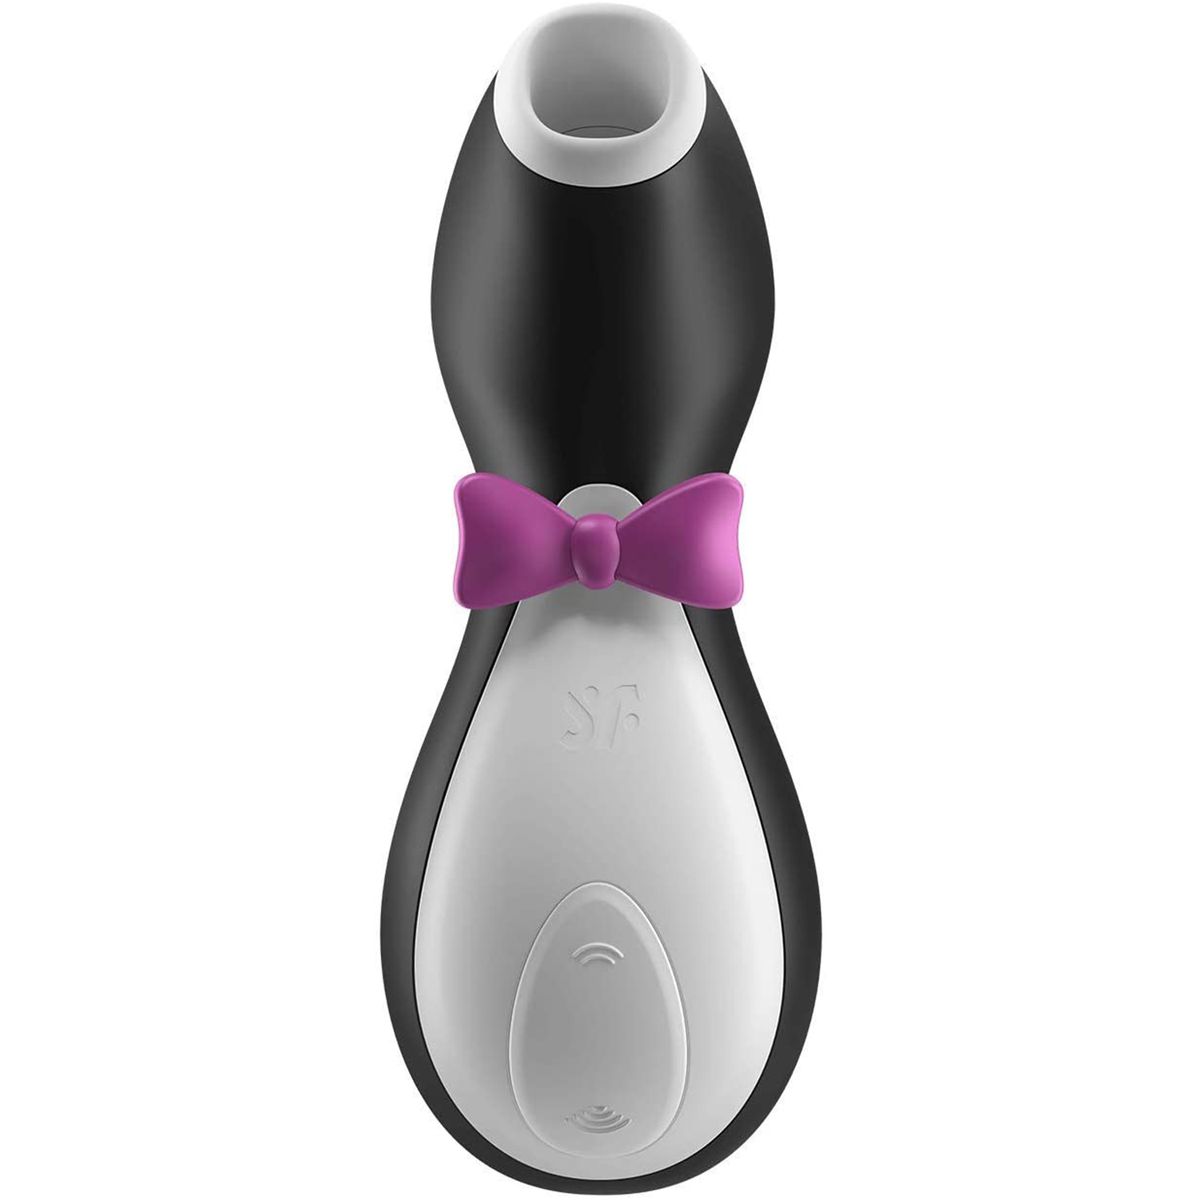 Best-Selling Sex Toys Black Friday